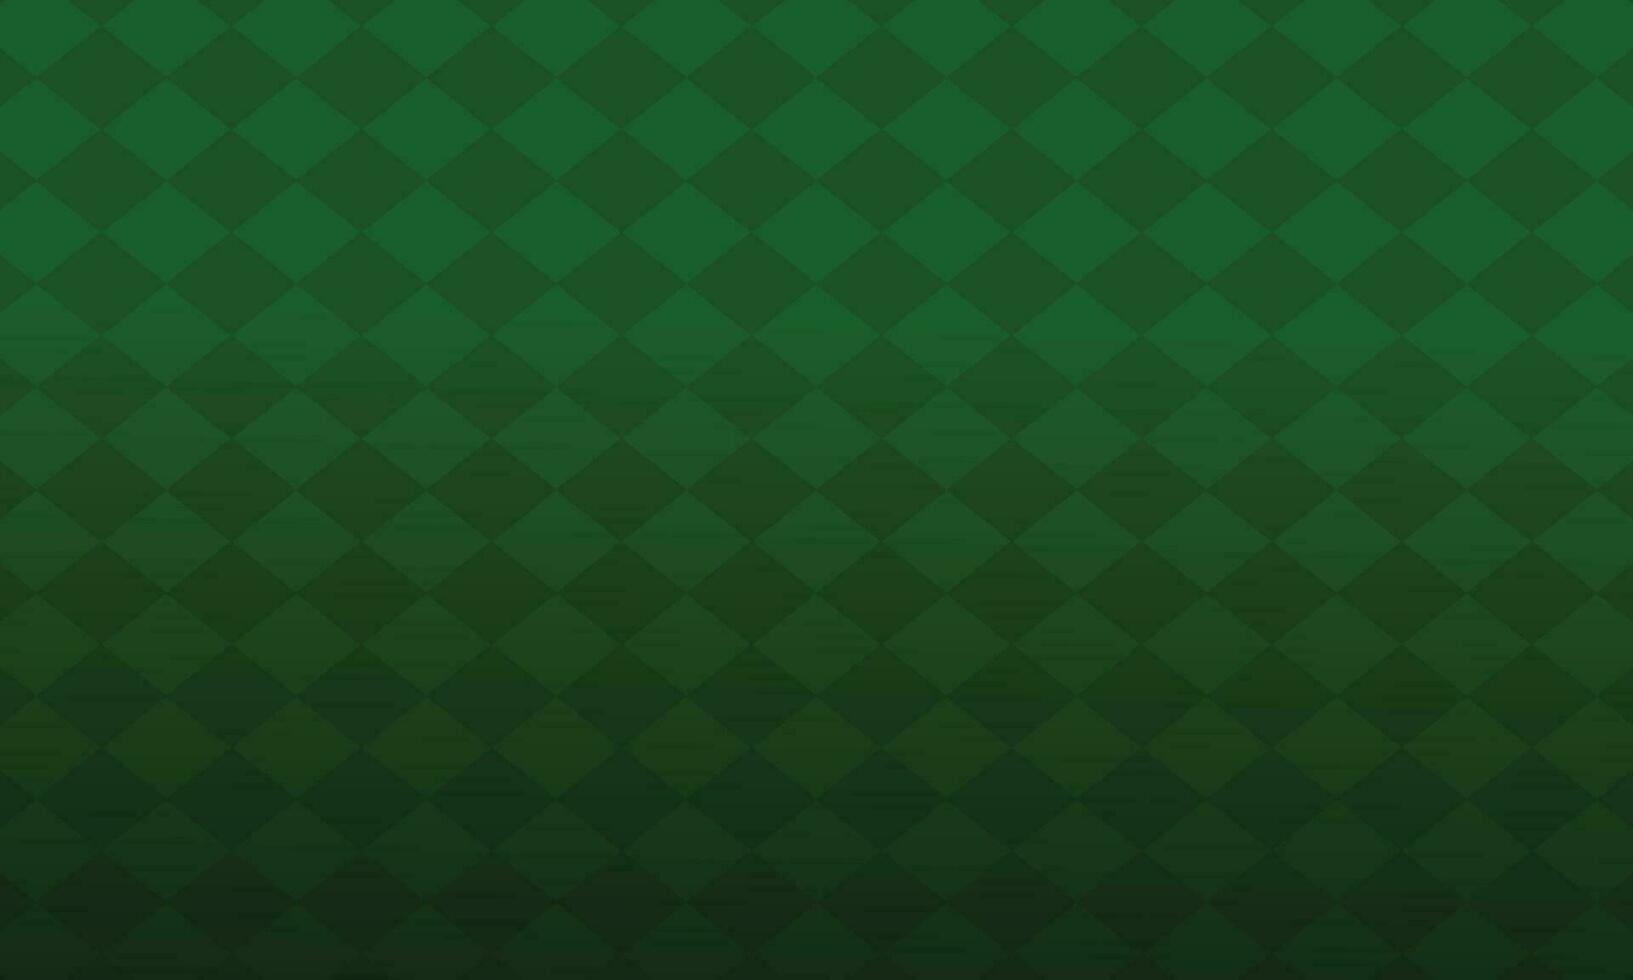 Vector green geometry textured illustration background